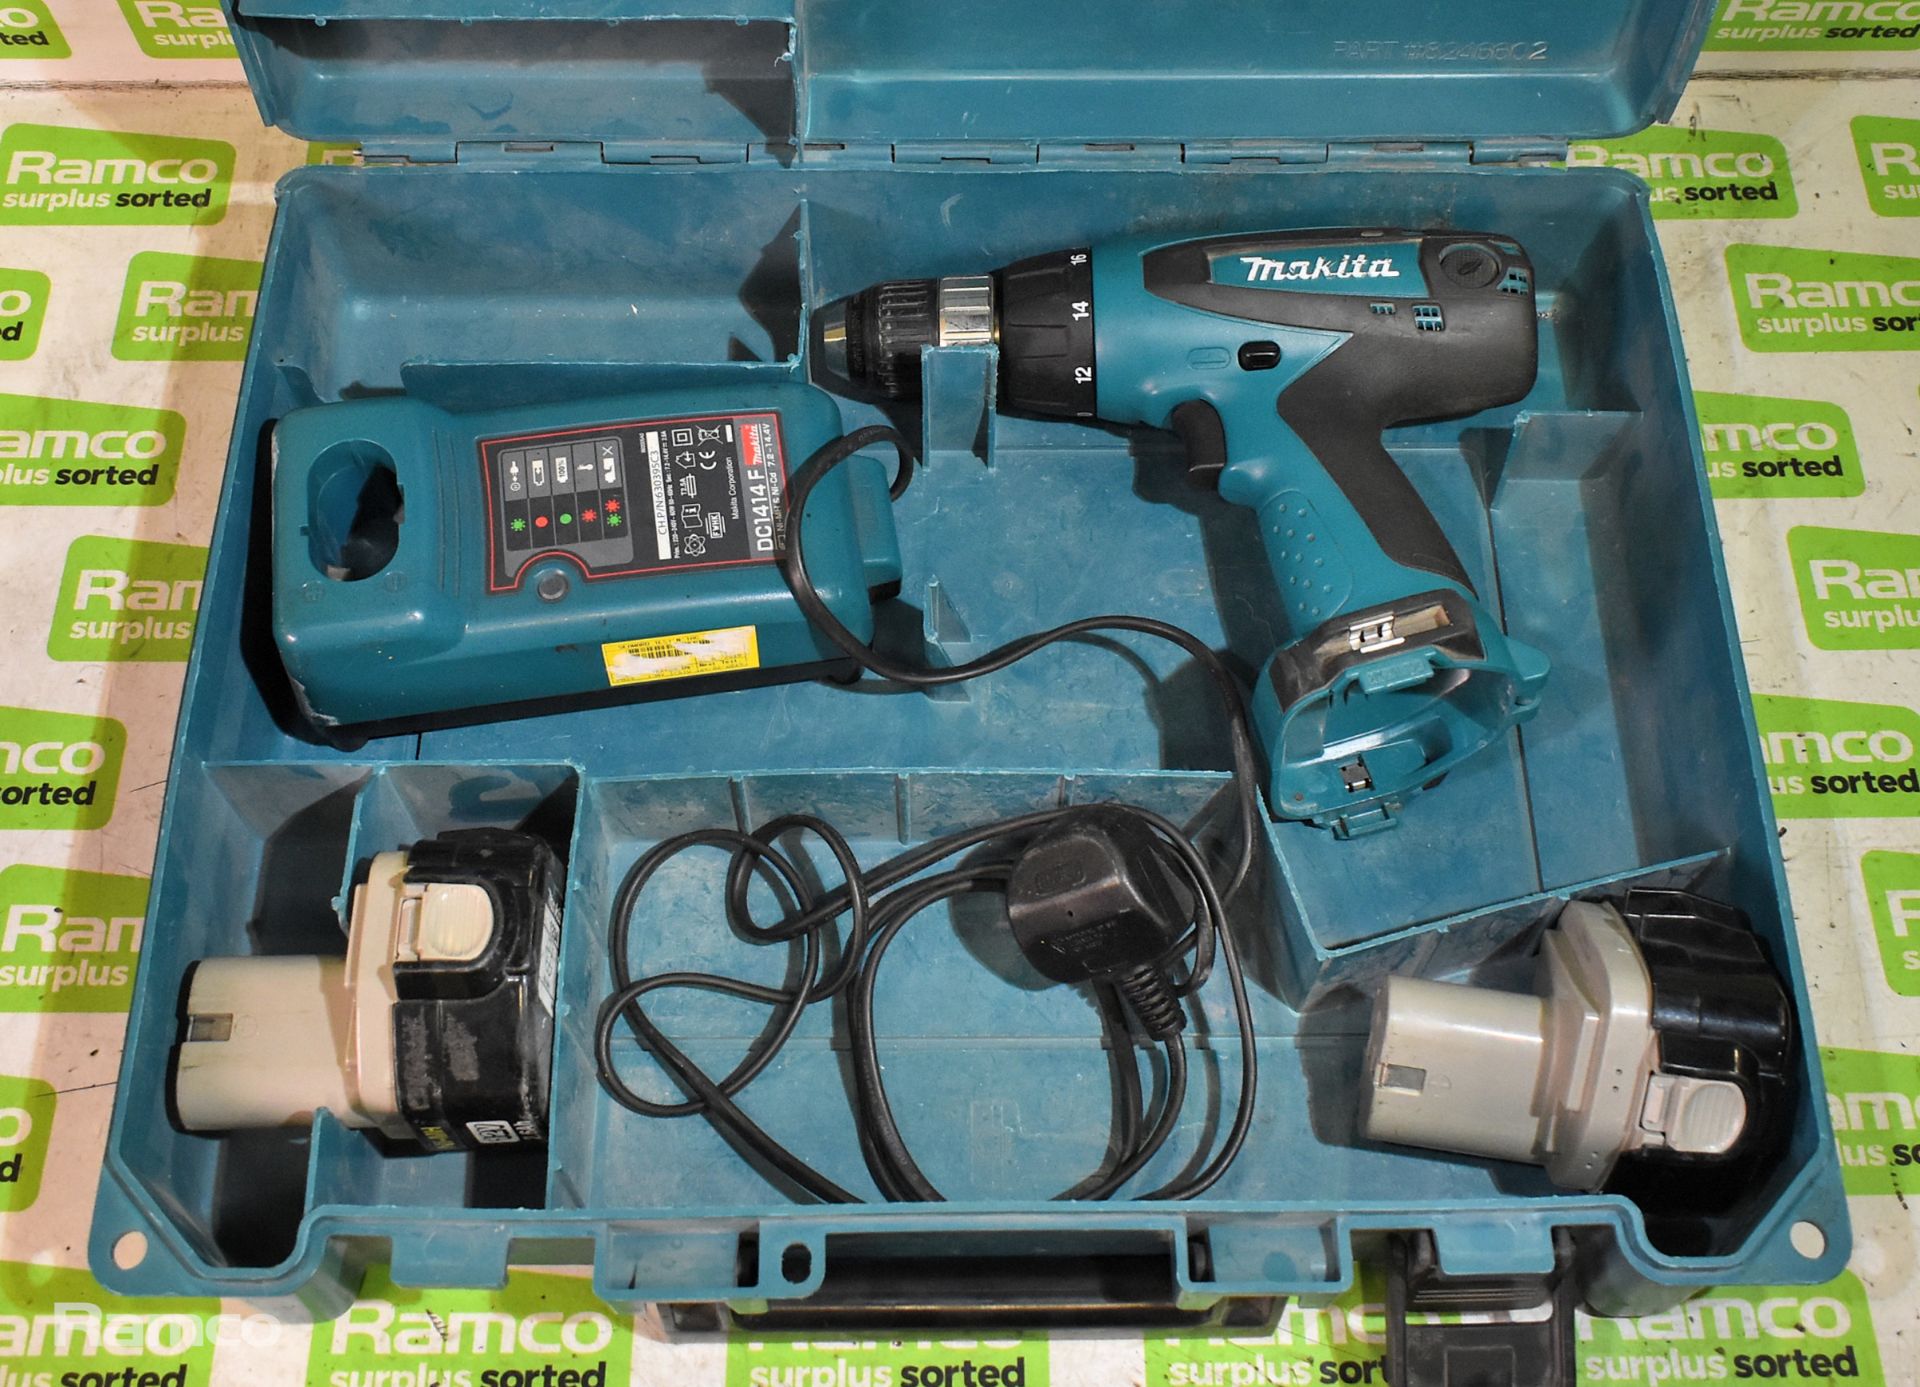 Makita 6317D cordless drill - DC1414F charger - 2 x 12V batteries - case - Image 2 of 5